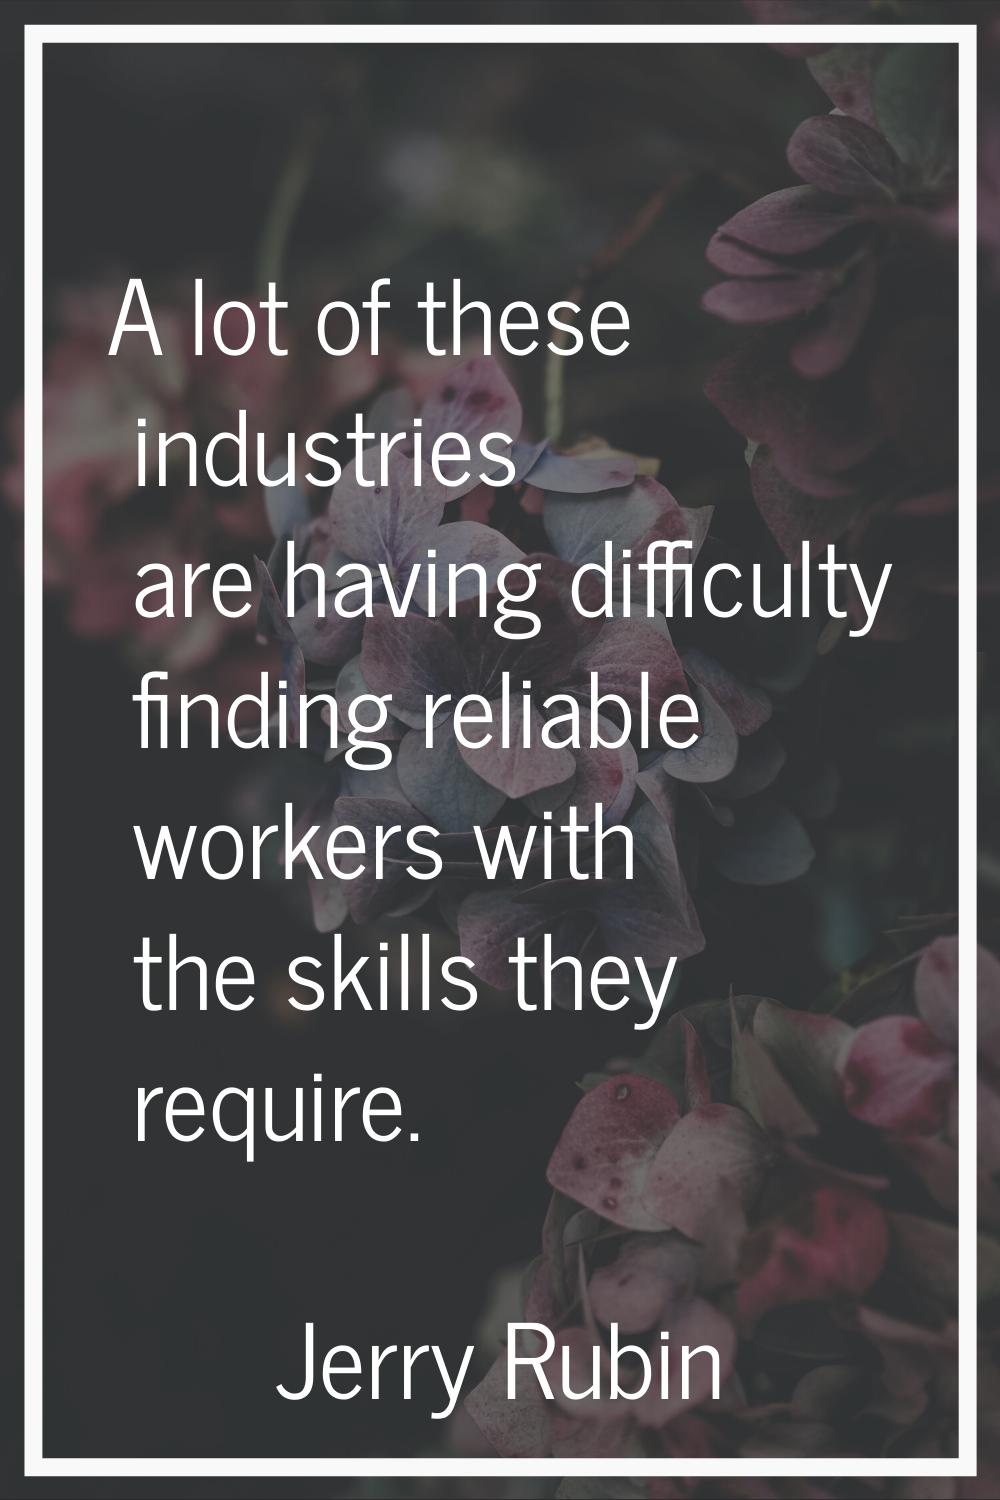 A lot of these industries are having difficulty finding reliable workers with the skills they requi